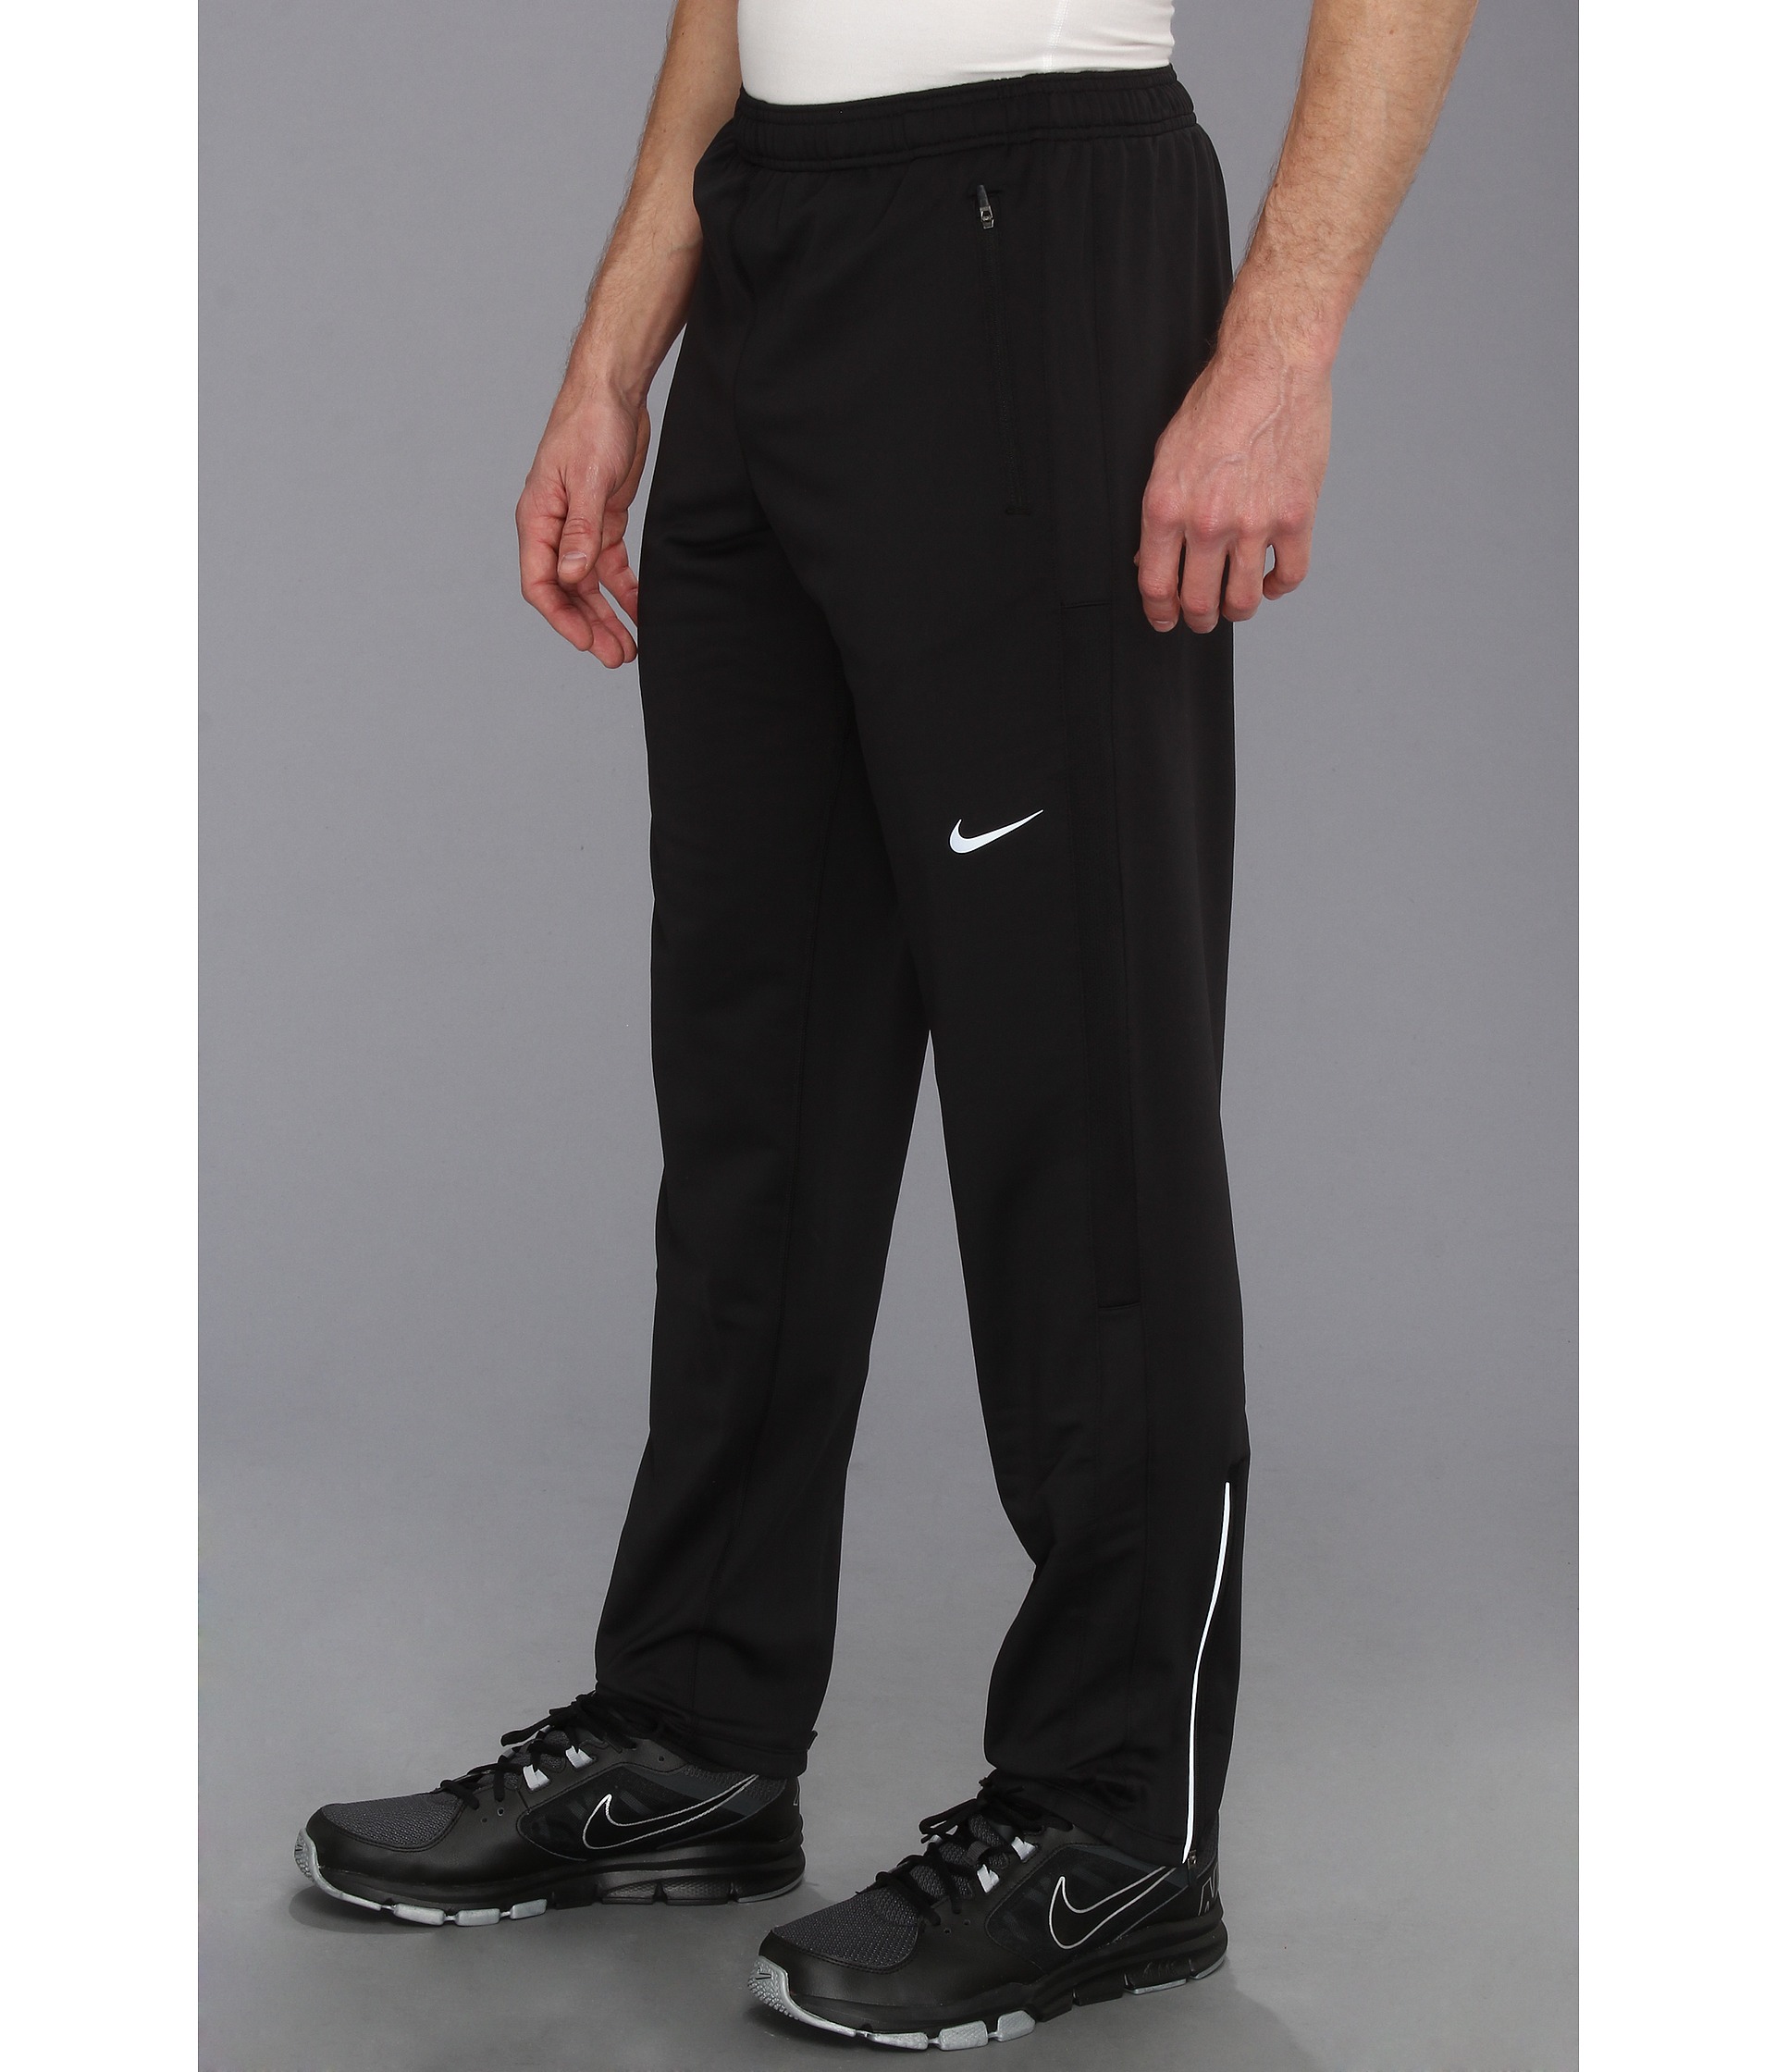 Nike Element Thermal Pant, Clothing | Shipped Free at Zappos